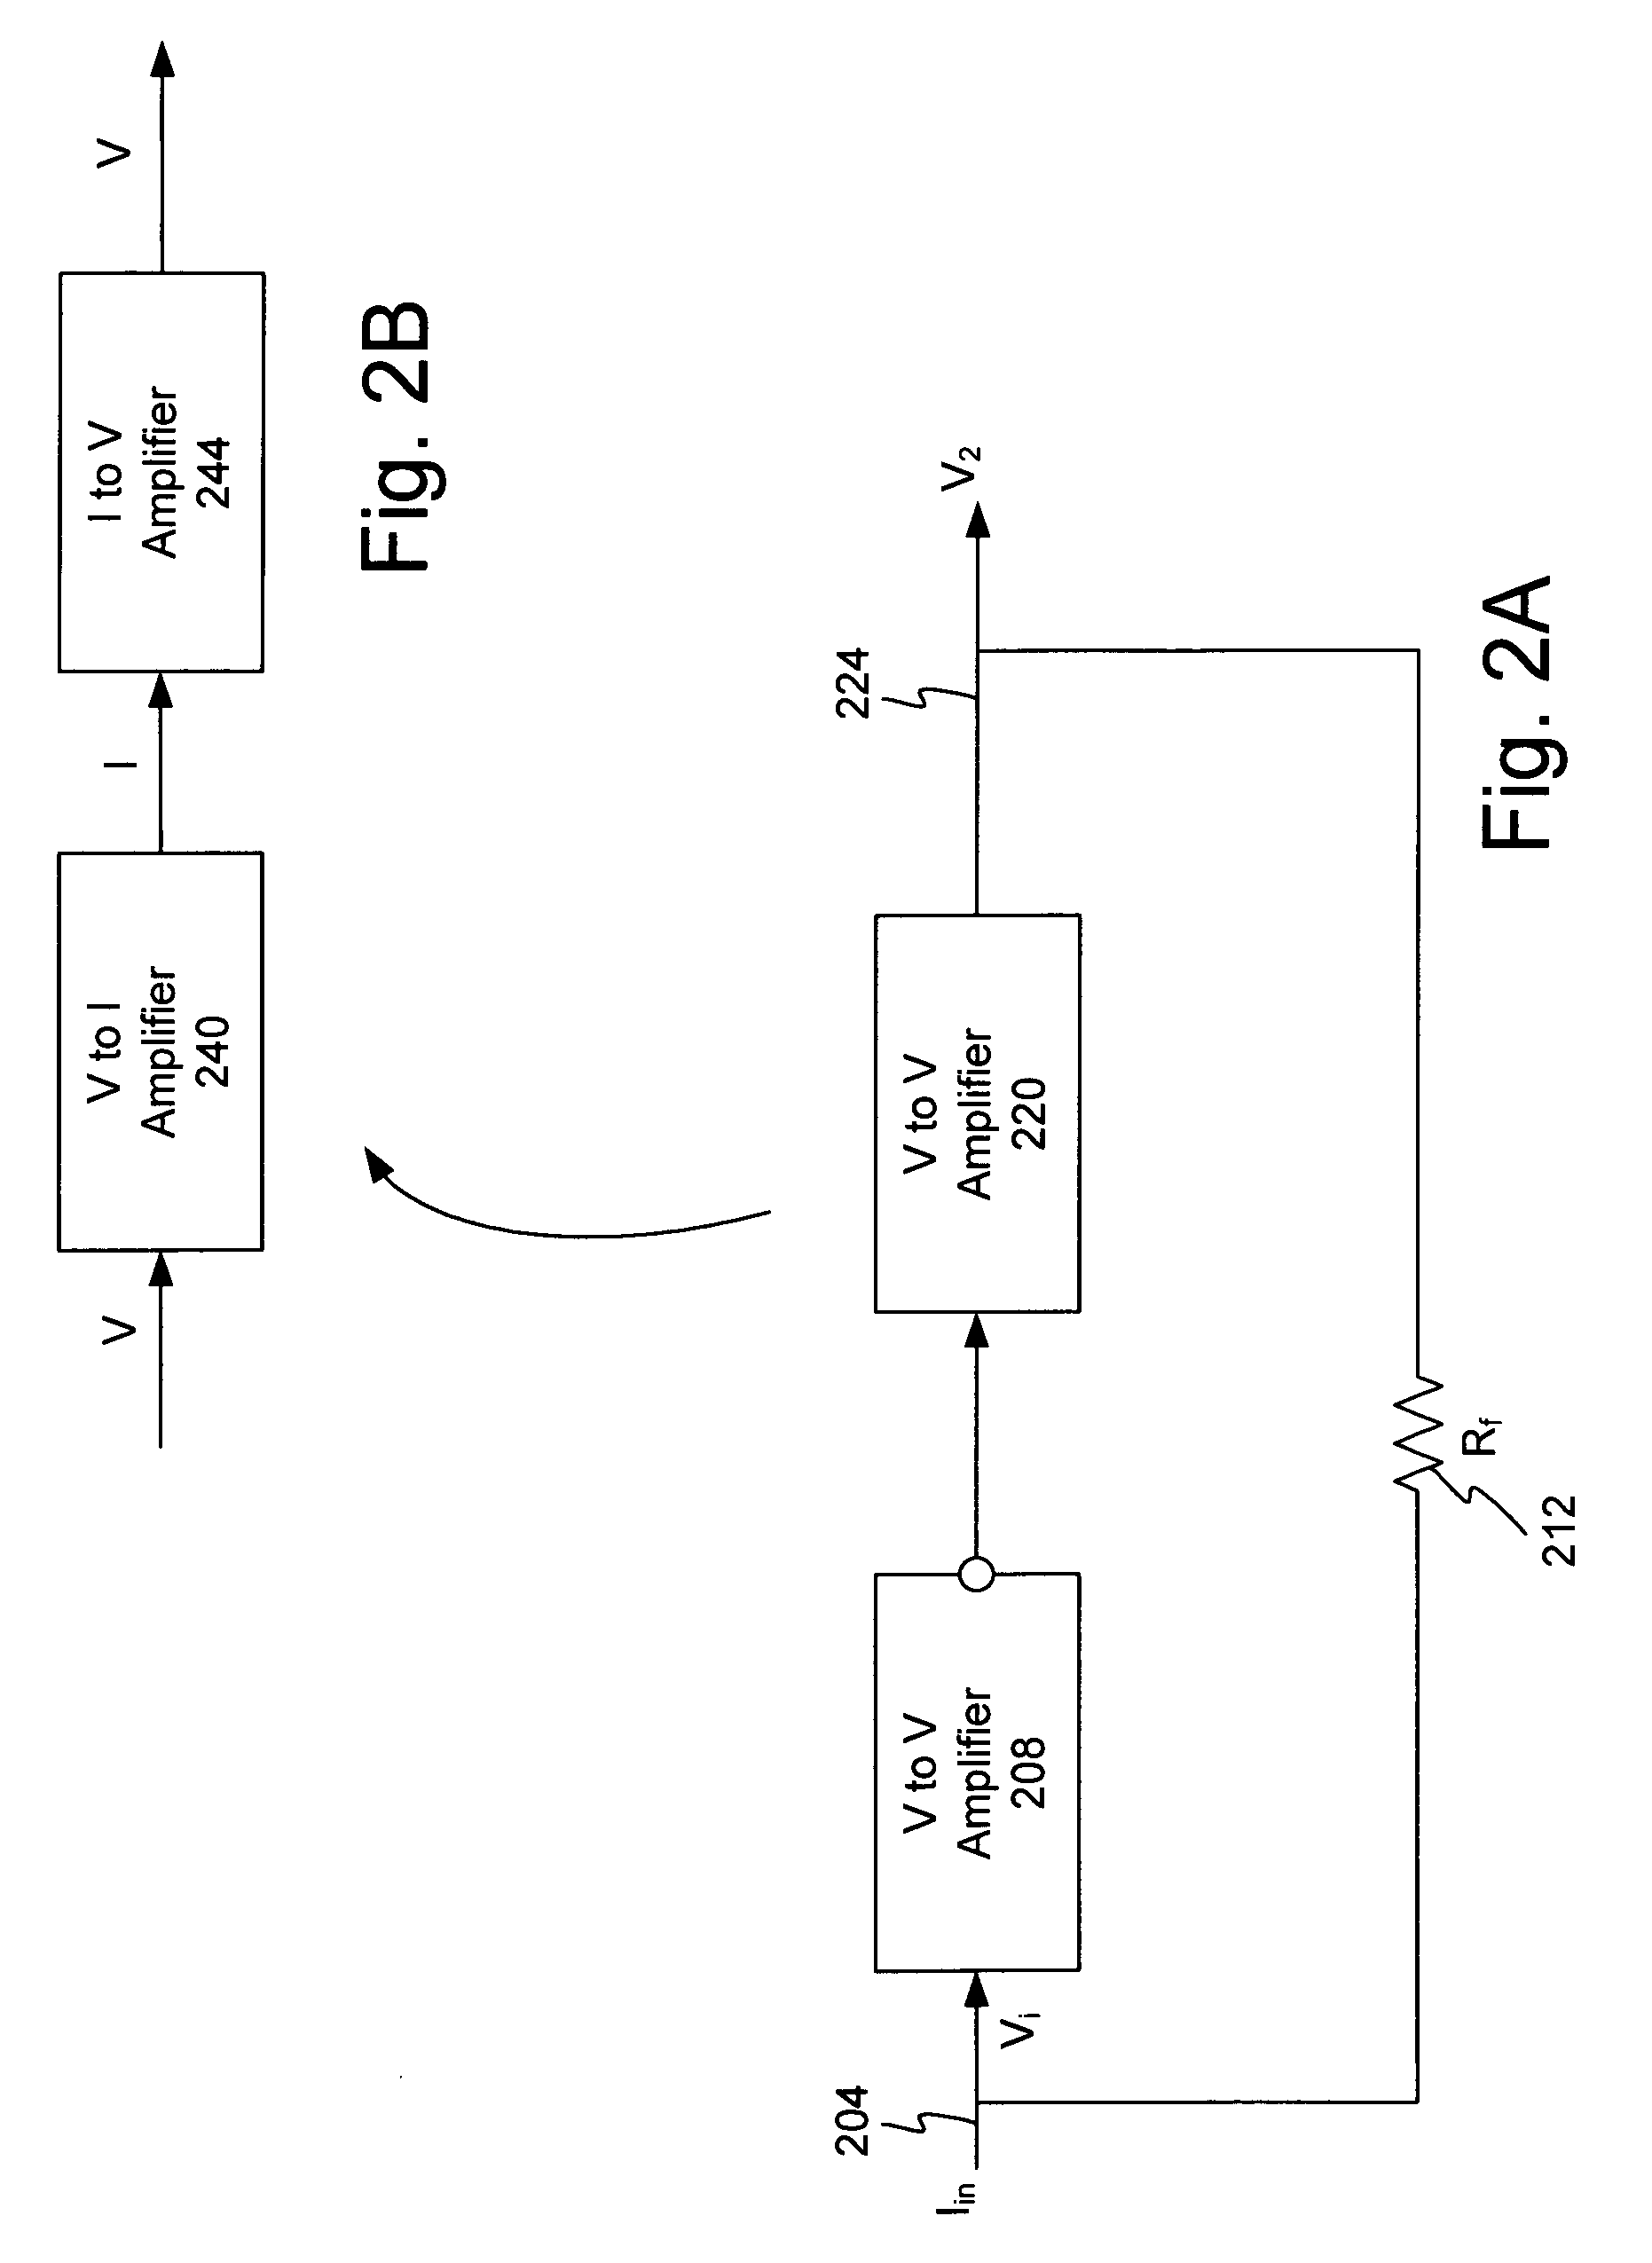 High sensitivity two-stage amplifier